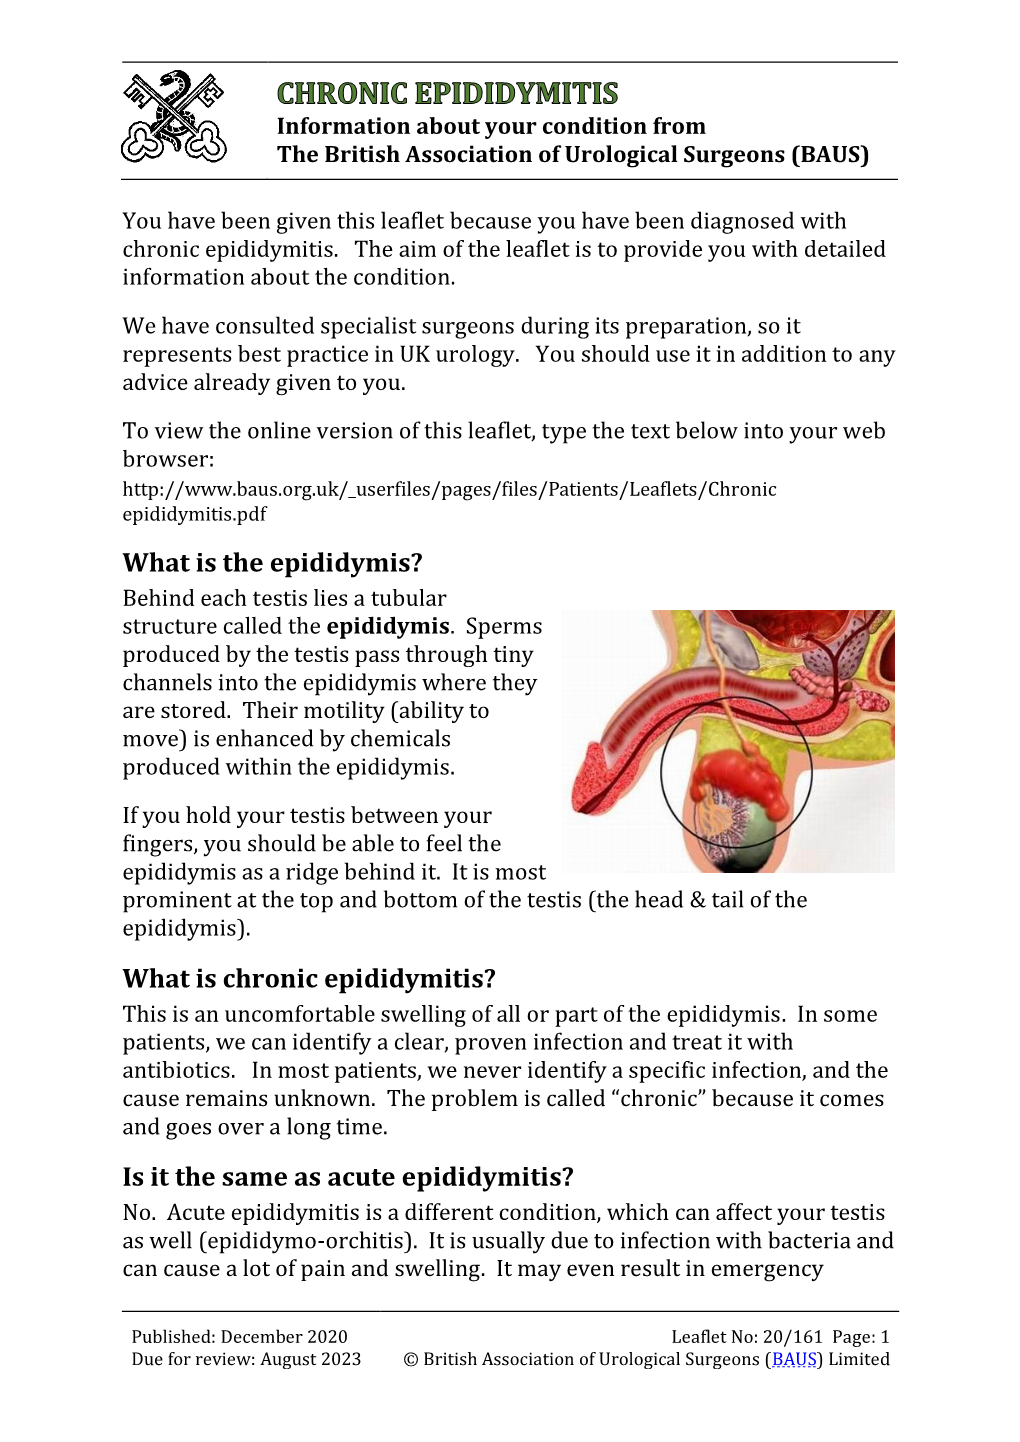 What Is Chronic Epididymitis? This Is an Uncomfortable Swelling of All Or Part of the Epididymis